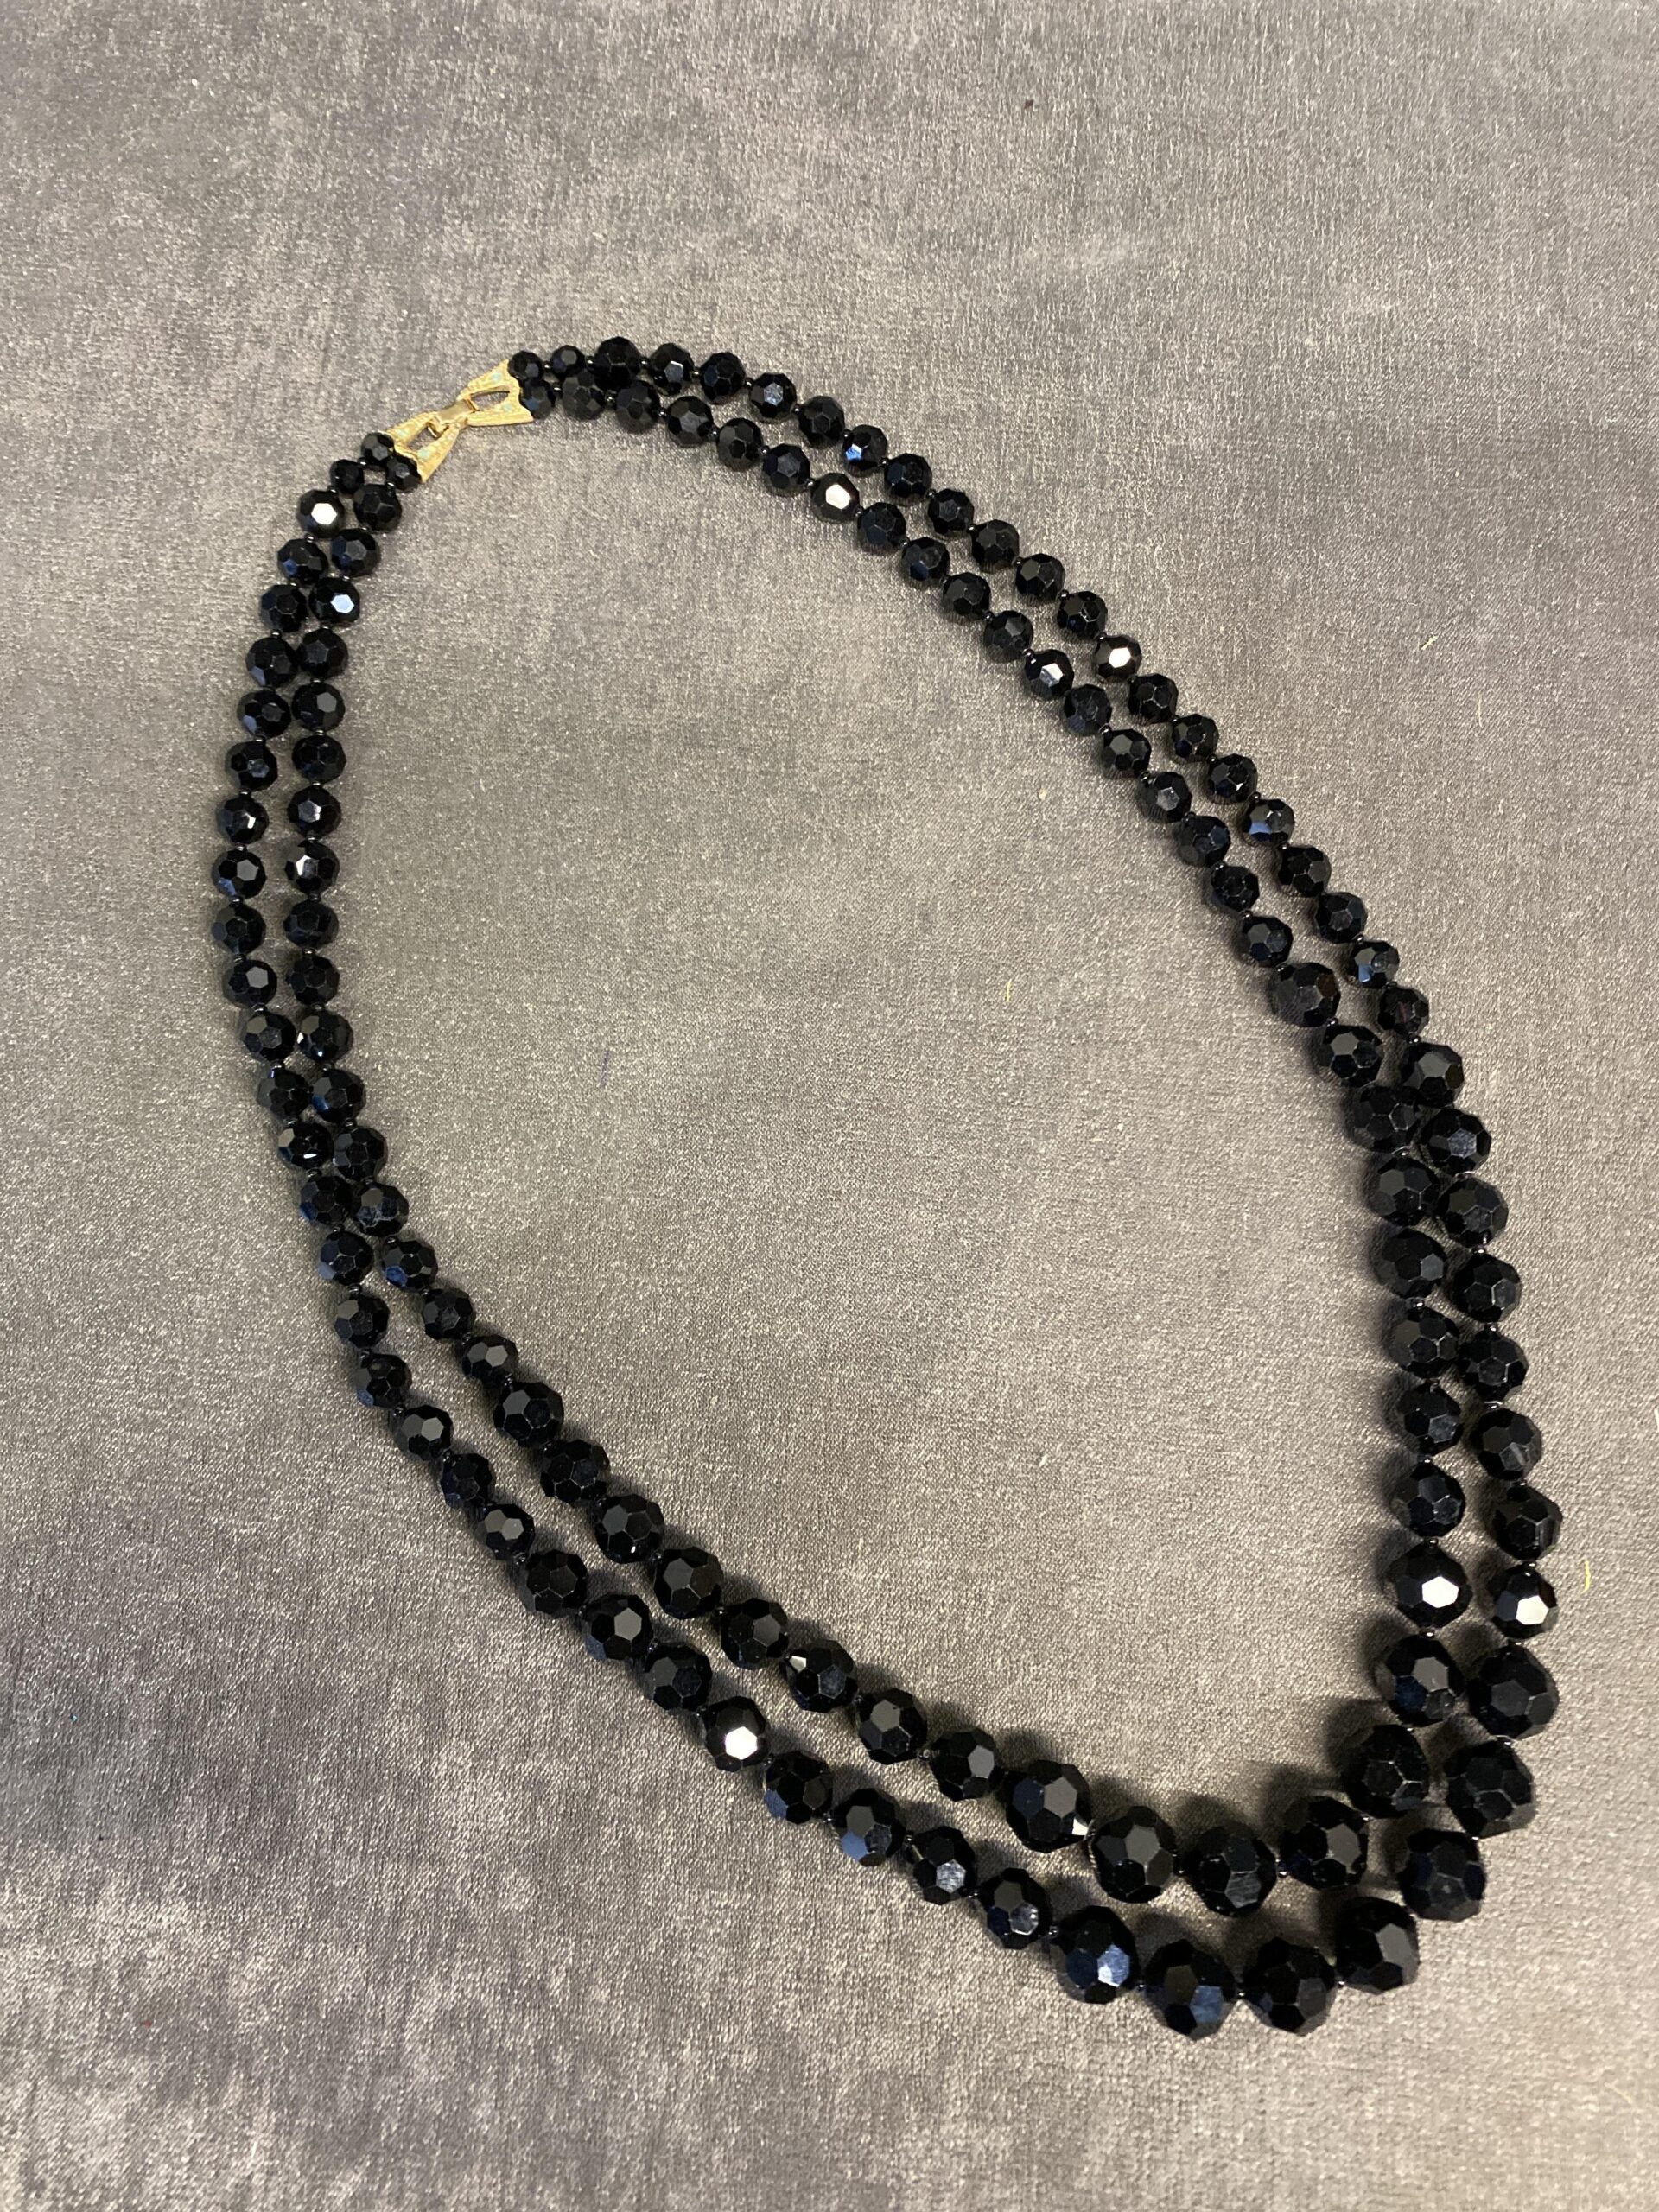 Black Bead Necklace – Double Strand